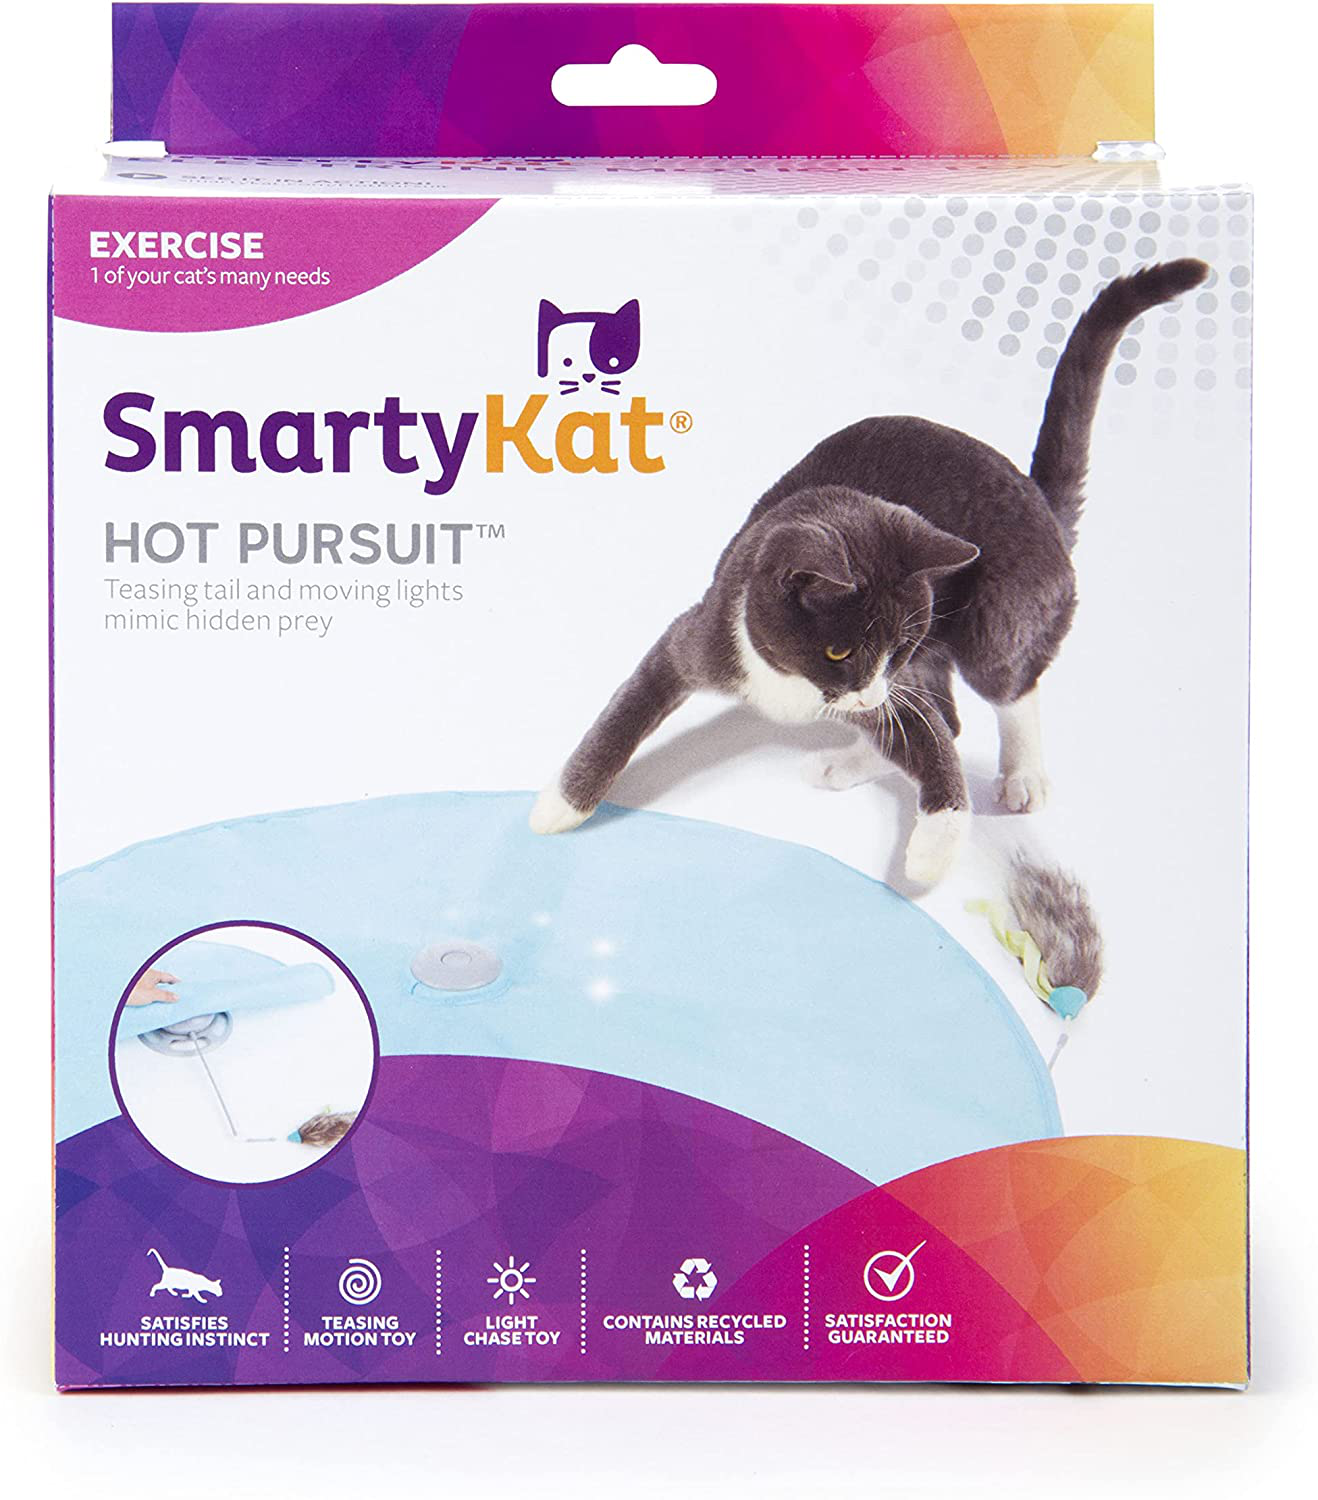 Smartykat Hot Pursuit, Electronic Concealed Motion Cat Toy, Interactive Spinning Feathered Wand, 2 Speed Controls & Moving Lights, Battery Powered Animals & Pet Supplies > Pet Supplies > Cat Supplies > Cat Toys SmartyKat   